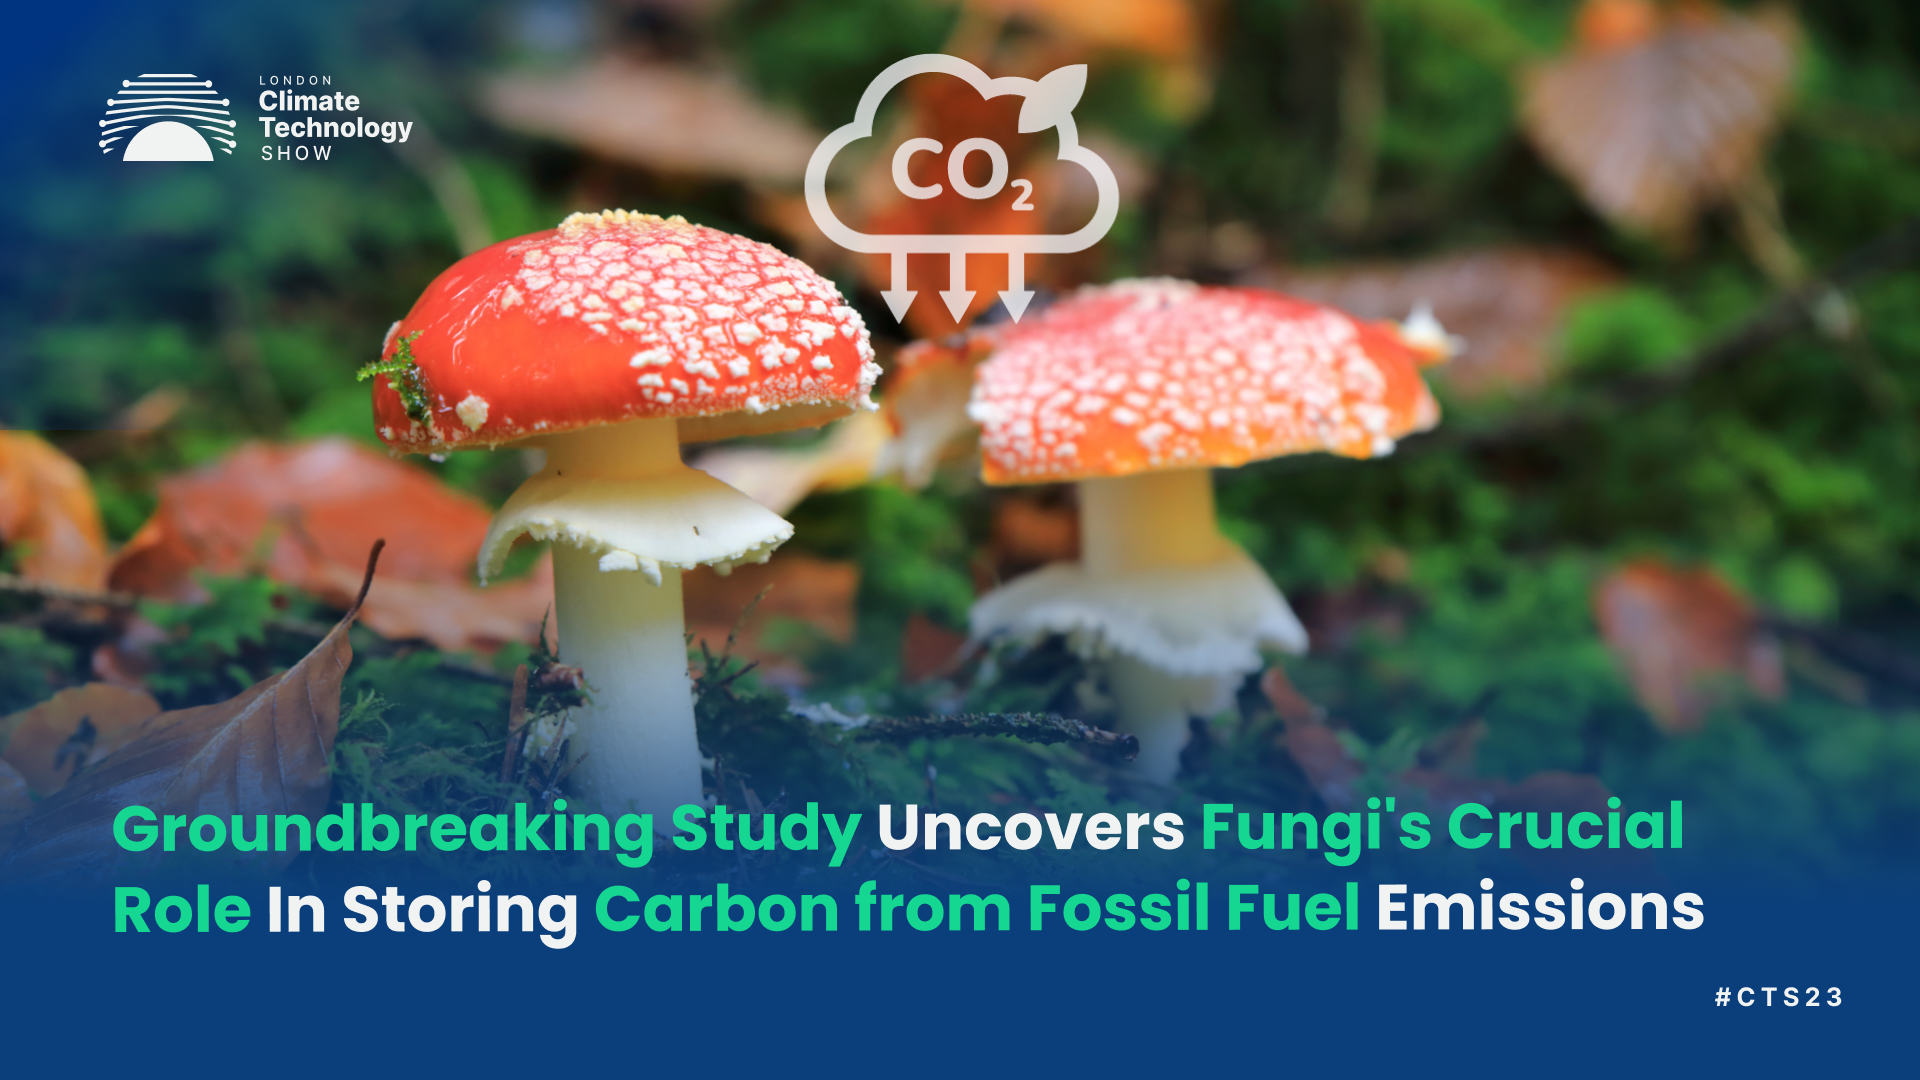 Groundbreaking Study Uncovers Fungi's Crucial Role In Storing Carbon from Fossil Fuel Emissions